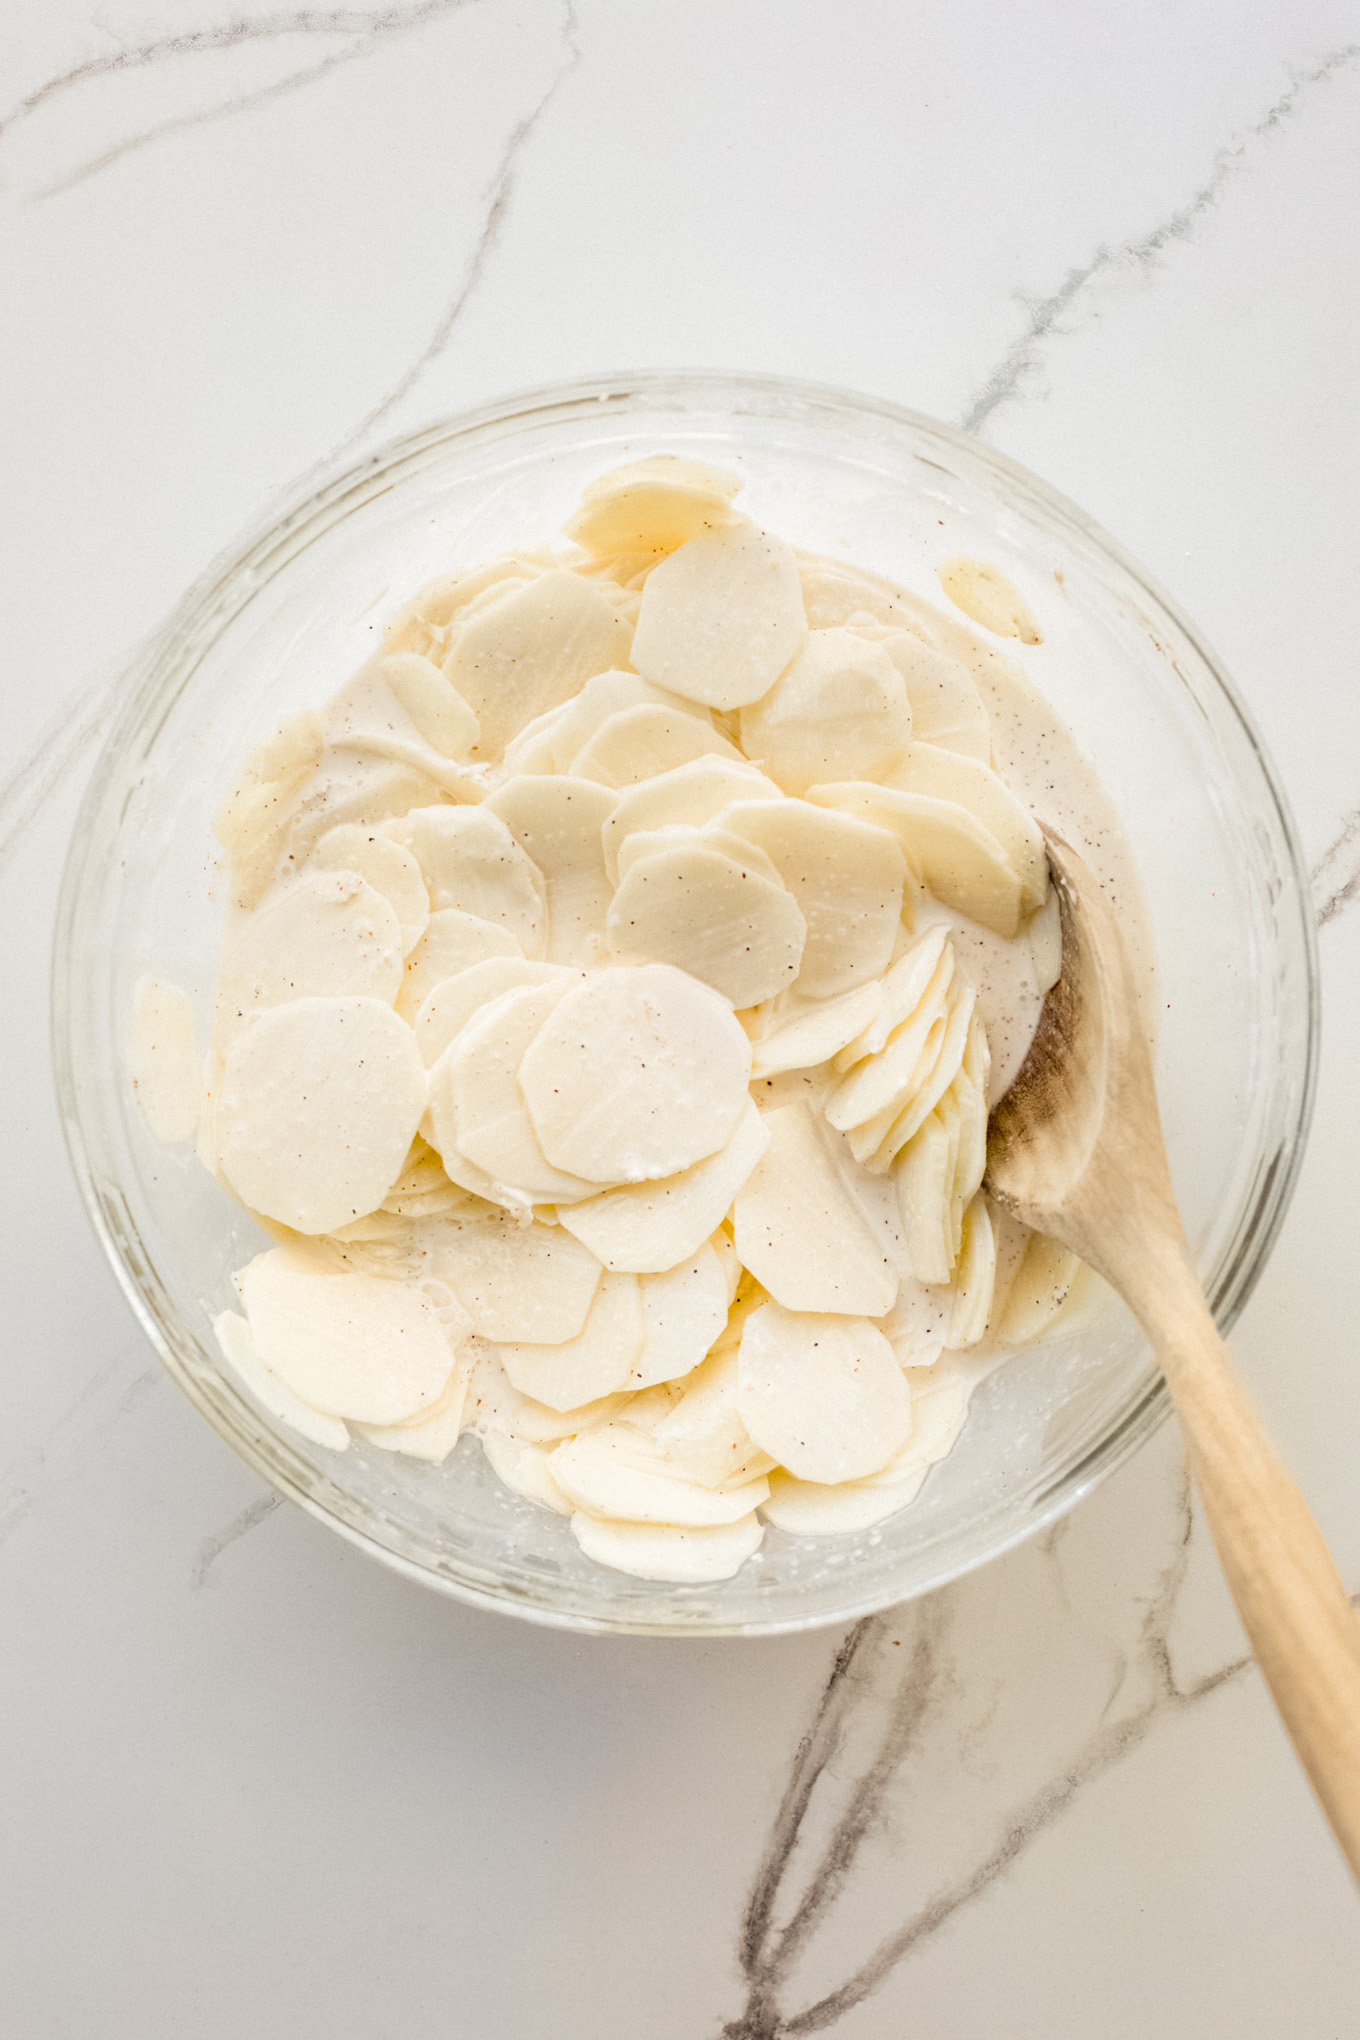 sliced potatoes in glass bowl with cream.